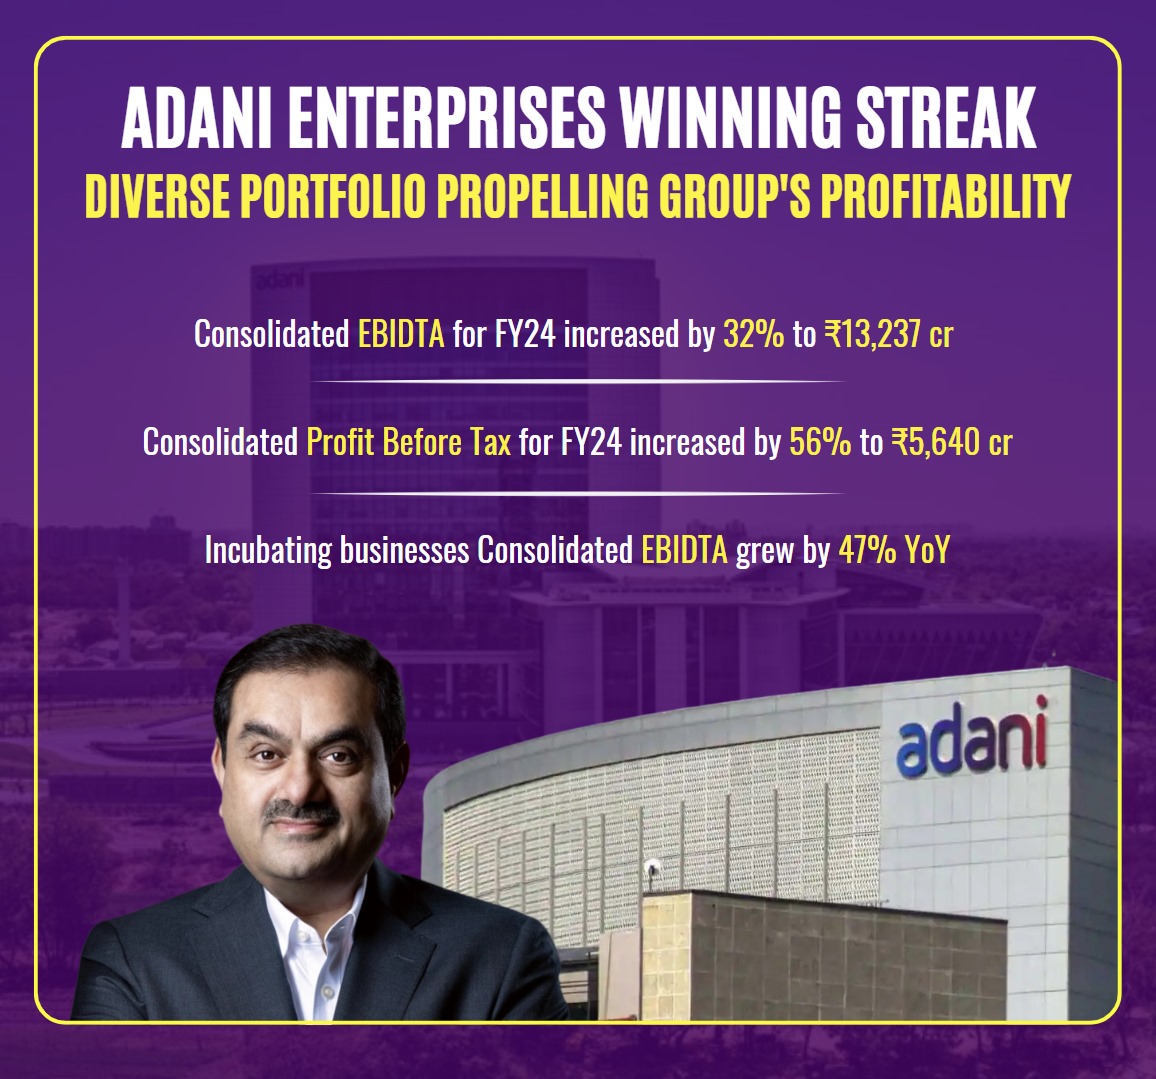 Adani Airports sees 19% passenger traffic growth! Mumbai Airport wins Cargo Airport of the Year Award. Adani is transforming India's aviation landscape.